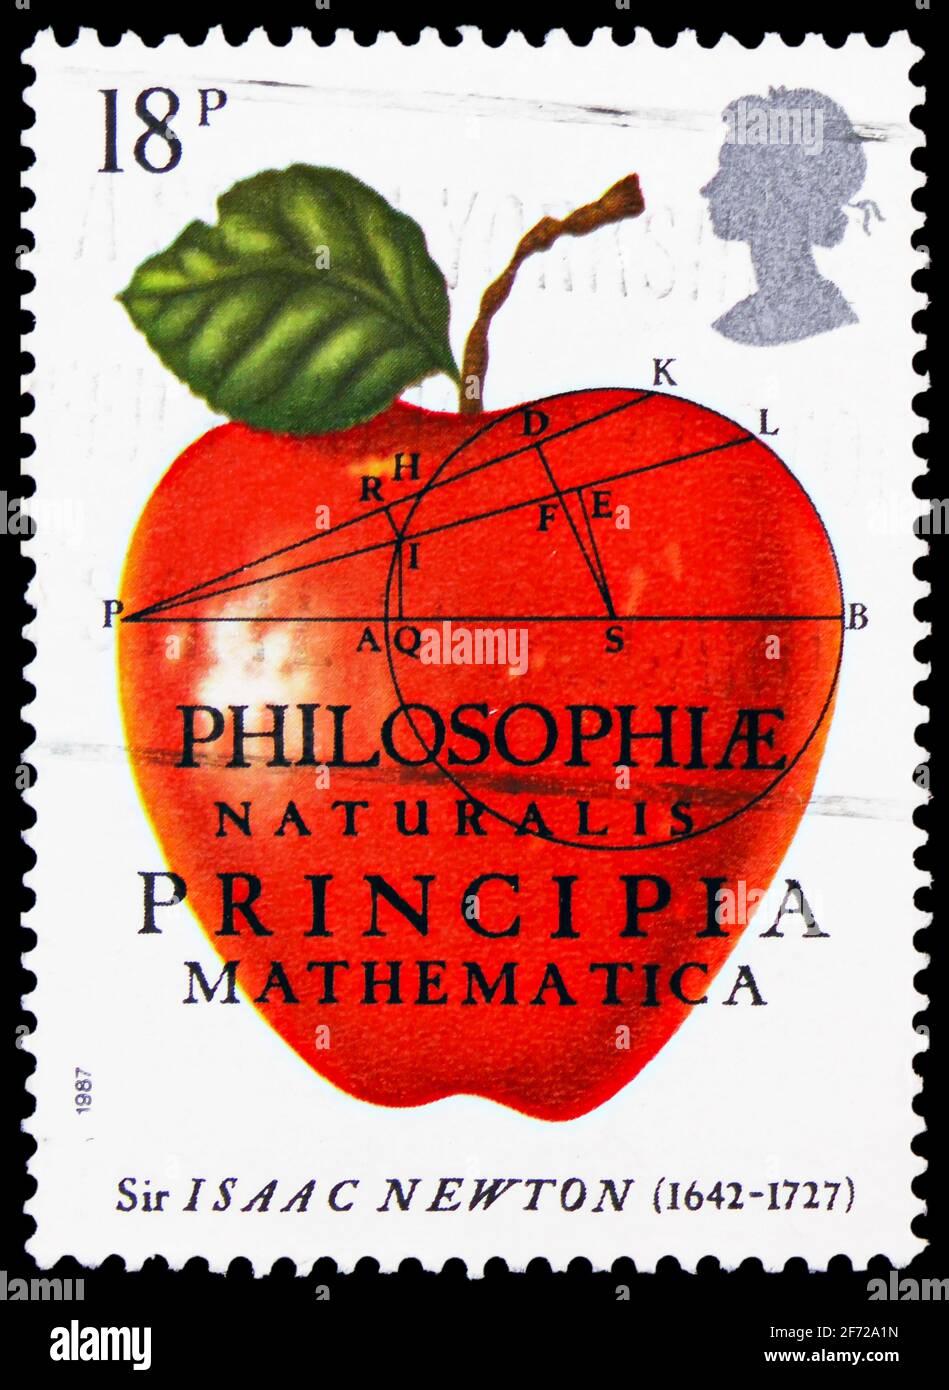 MOSCOW, RUSSIA - FEBRUARY 28, 2021: Postage stamp printed in United Kingdom shows The Principia Mathematica, Sir Isaac Newton serie, circa 1987 Stock Photo